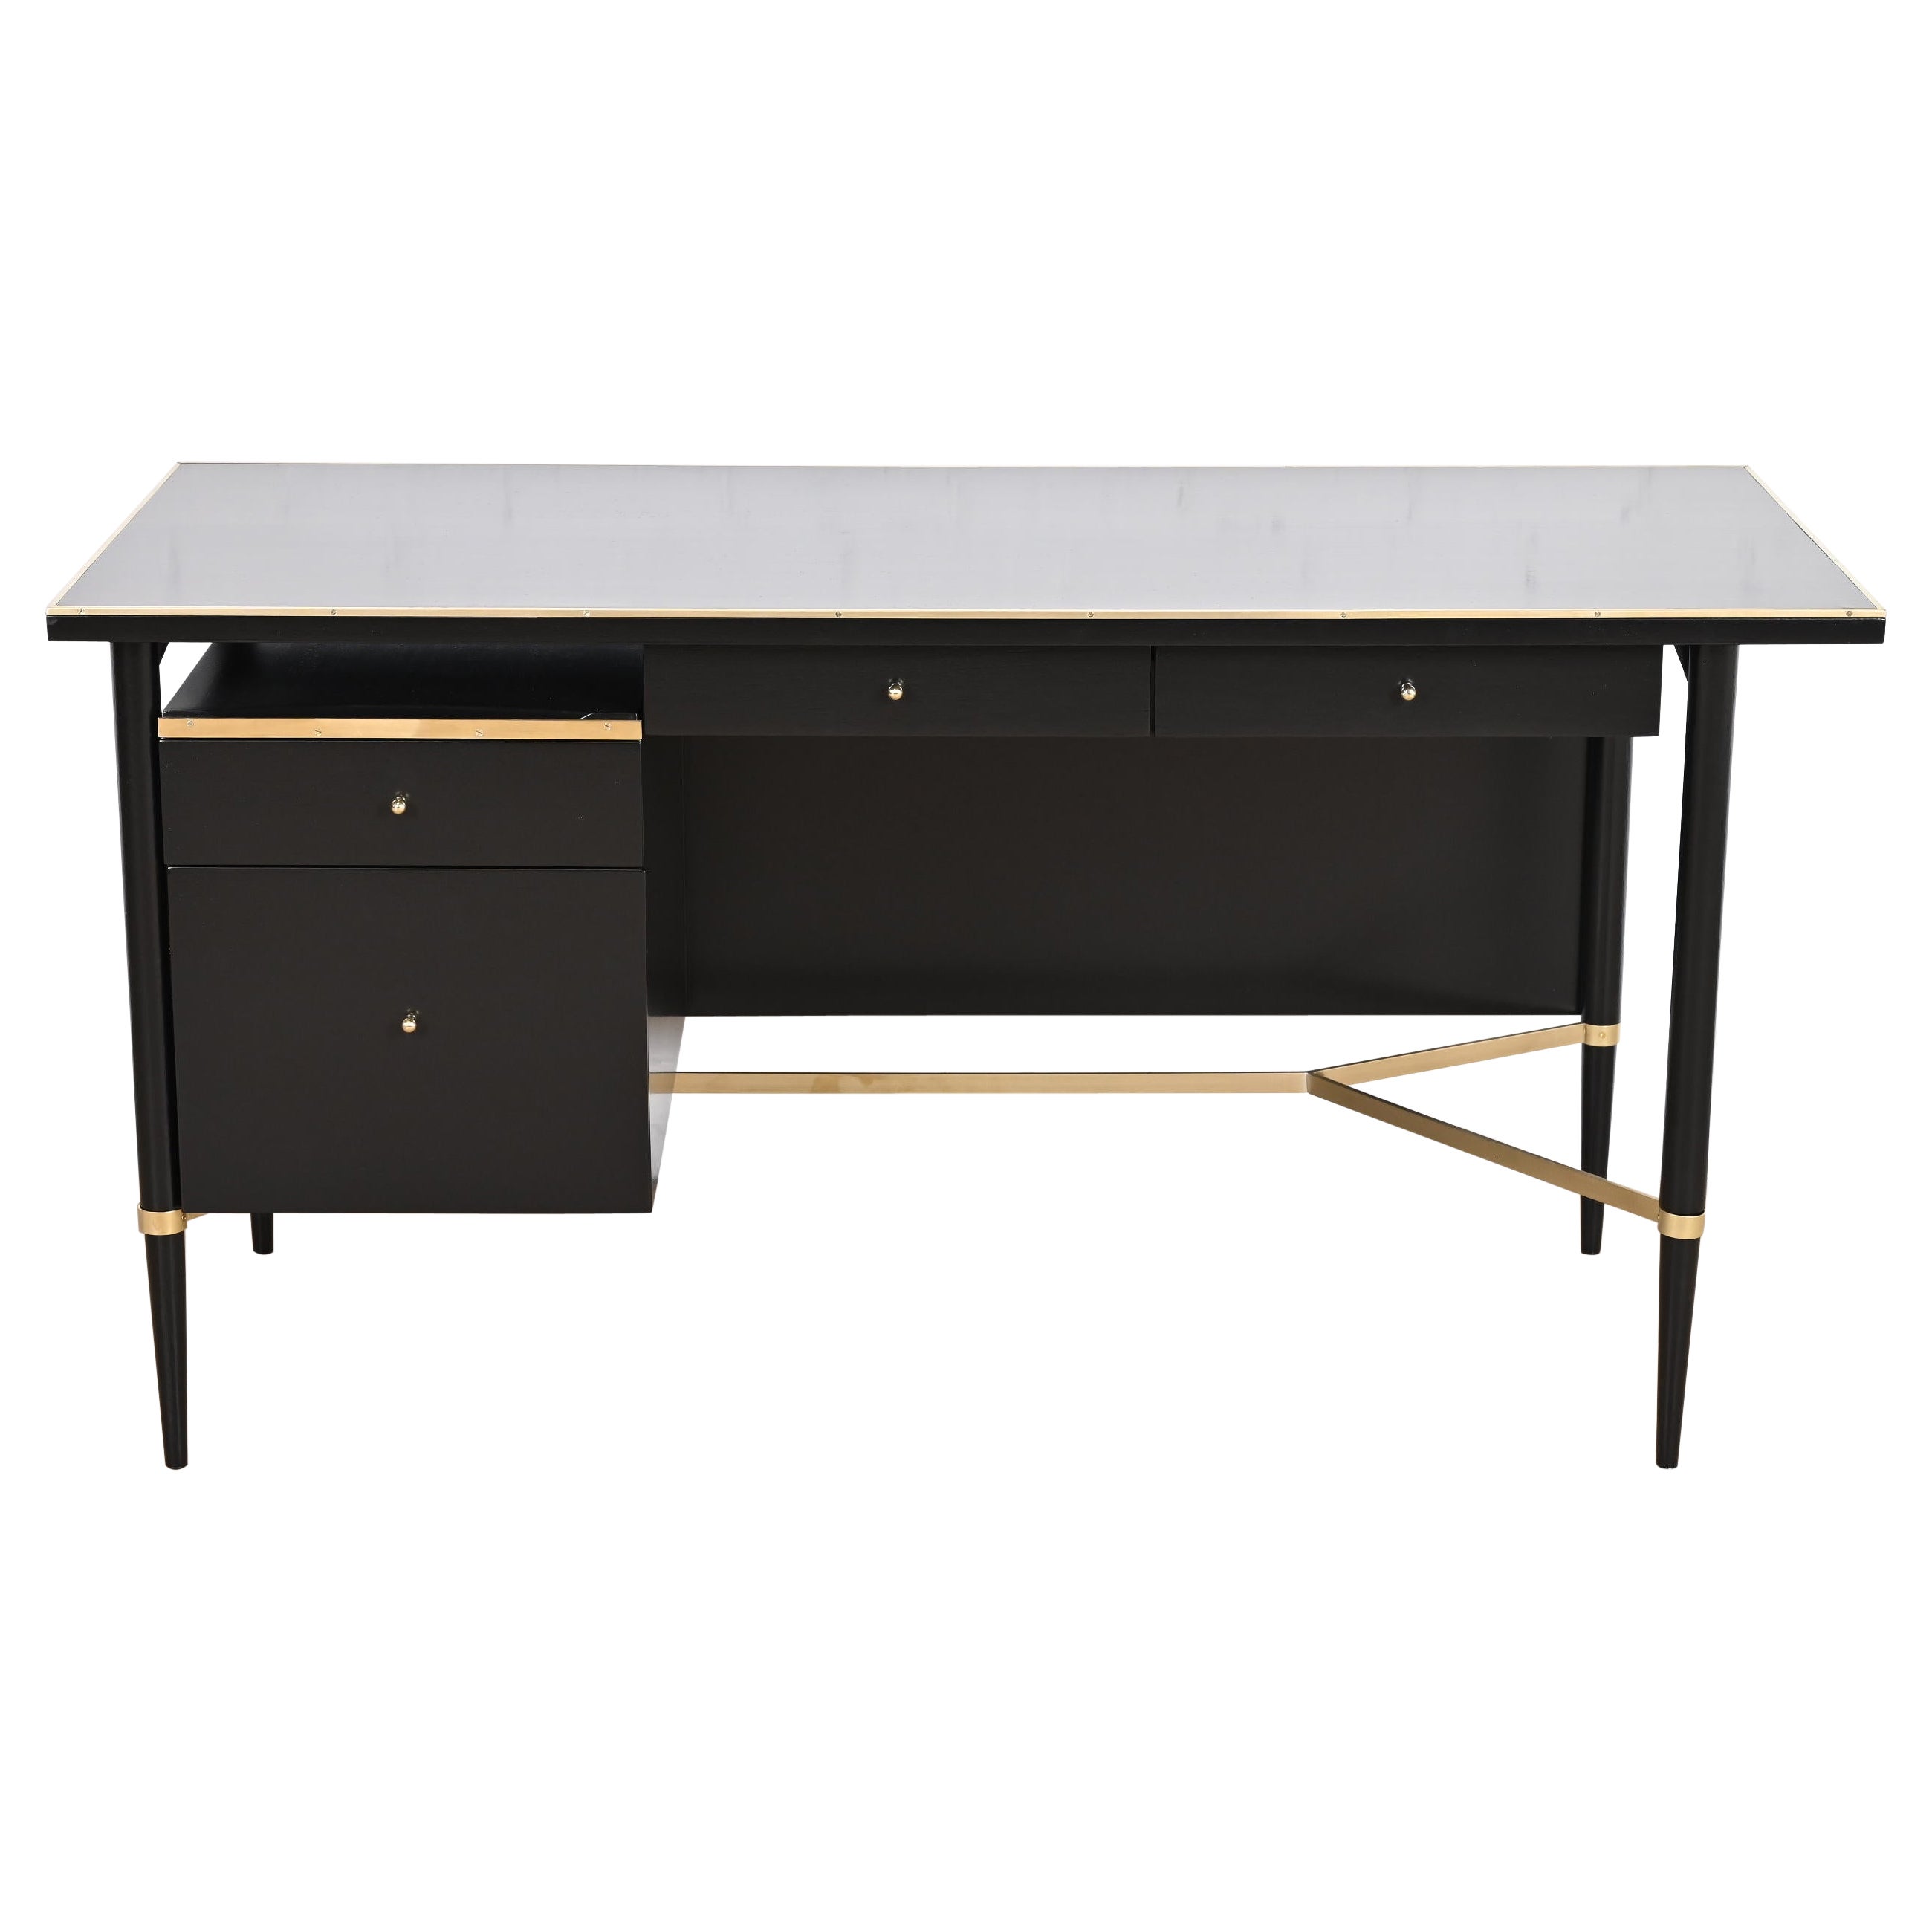 Paul McCobb Connoisseur Collection Black Lacquer and Brass Desk, Refinished For Sale